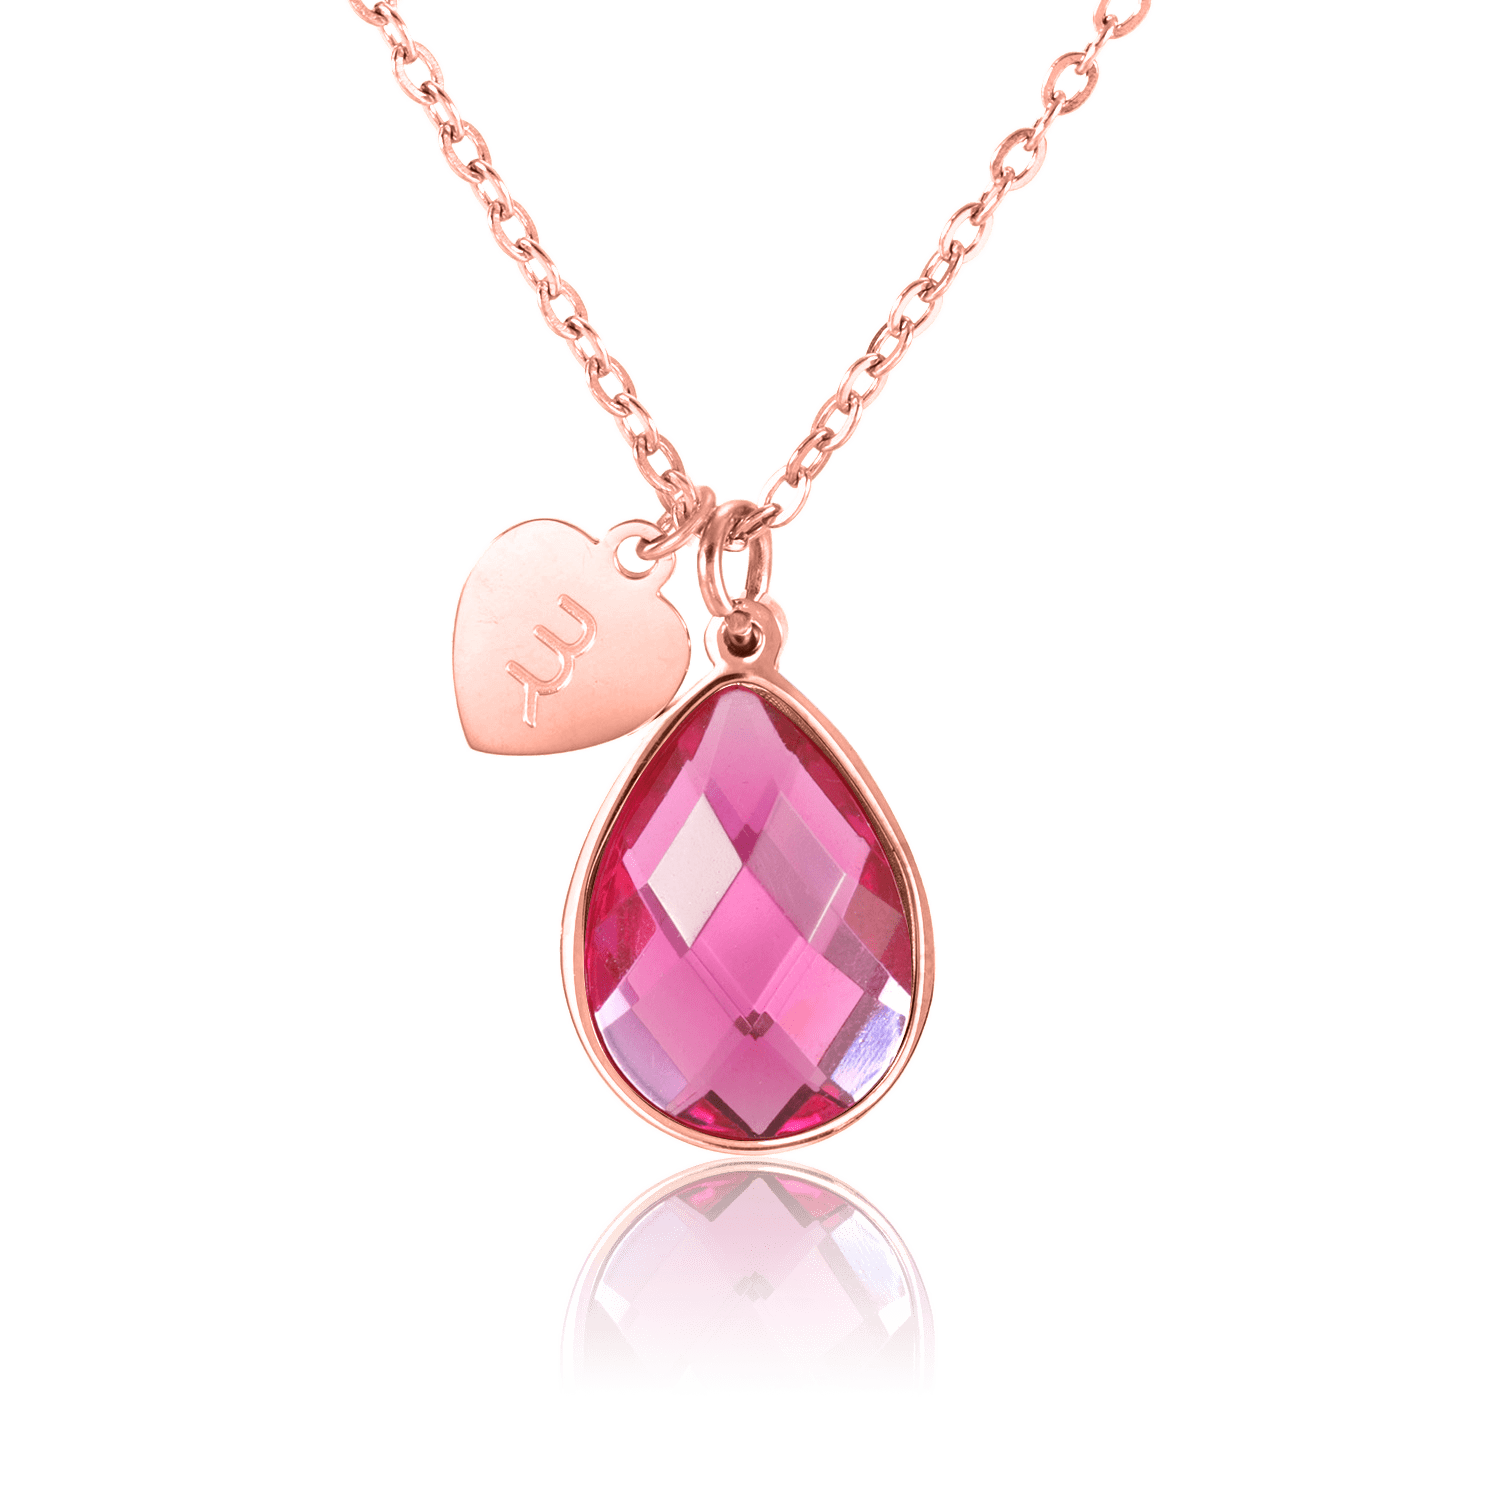 bianco rosso Necklaces Rose Gold September Birthstone - Rose Quartz cyprus greece jewelry gift free shipping europe worldwide